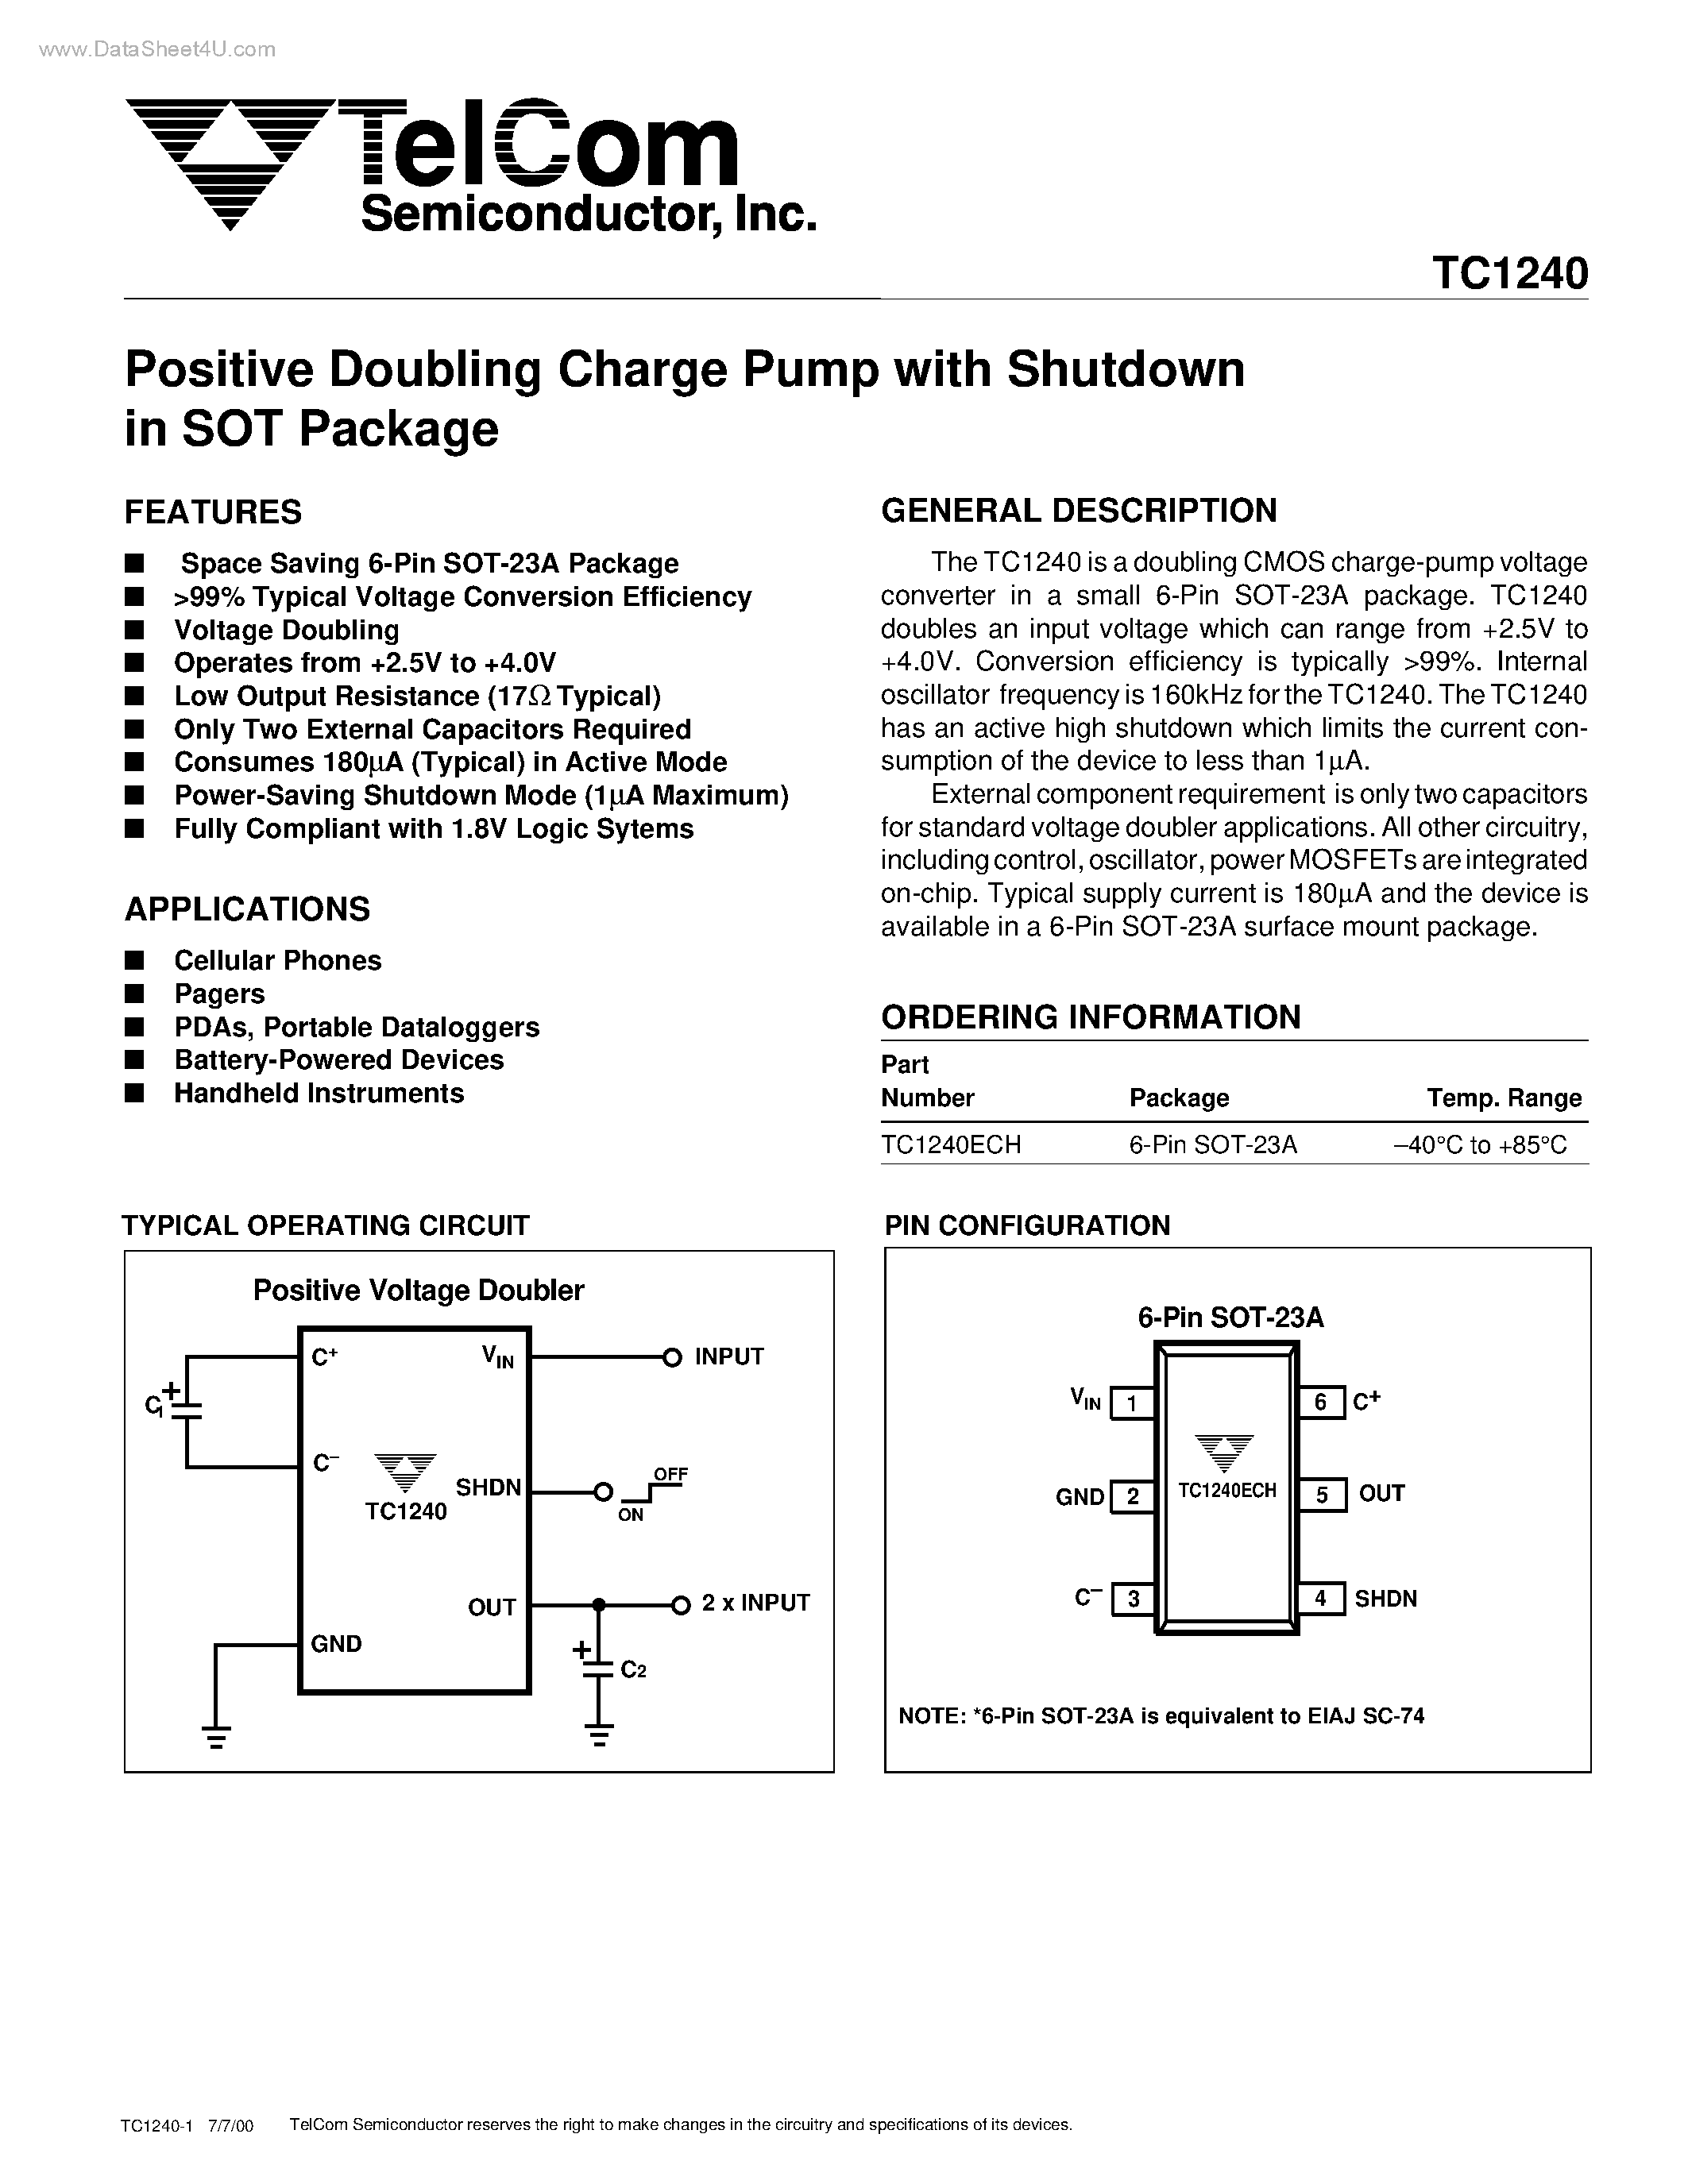 Datasheet TC1240 - Positive Doubling Charge Pump page 1